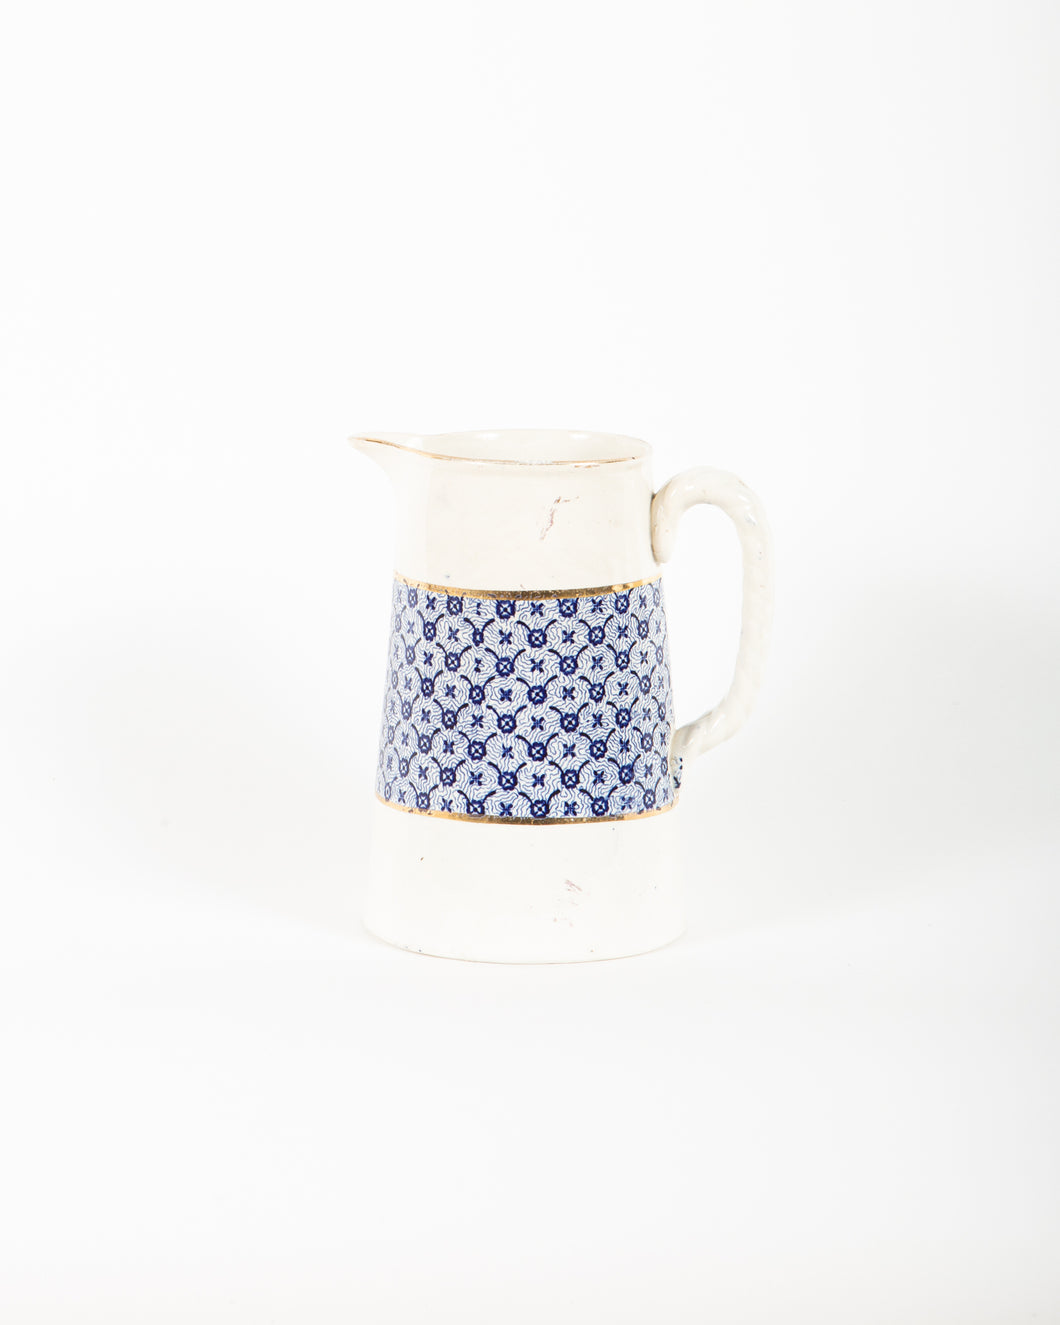 Antique Gold Trimmed White Ceramic Pitcher with Braided Handle and Blue Floral Design